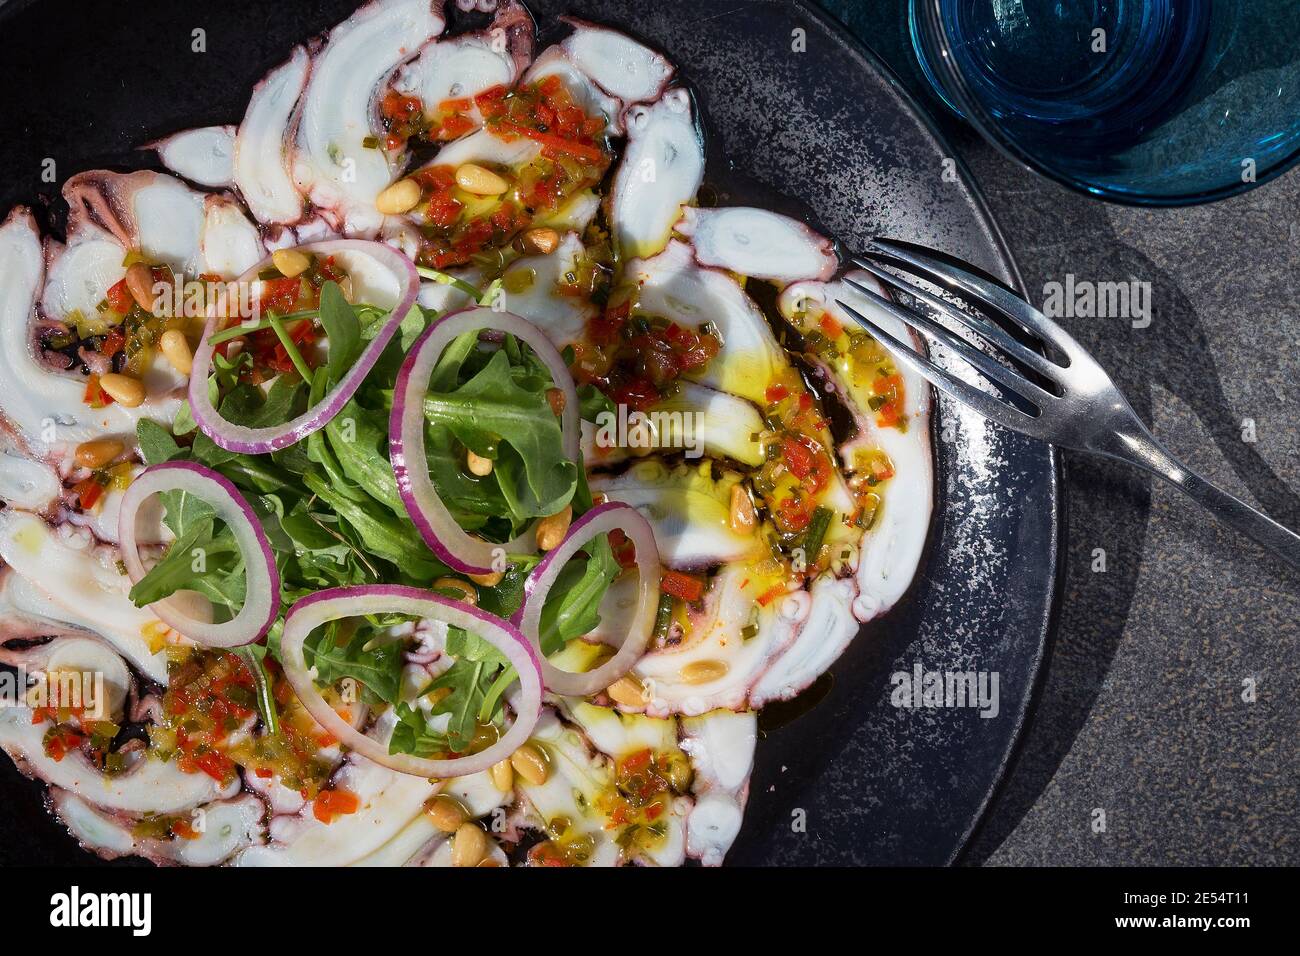 Close up gray dish of octopus carpaccio with onion and rocket salad Stock Photo